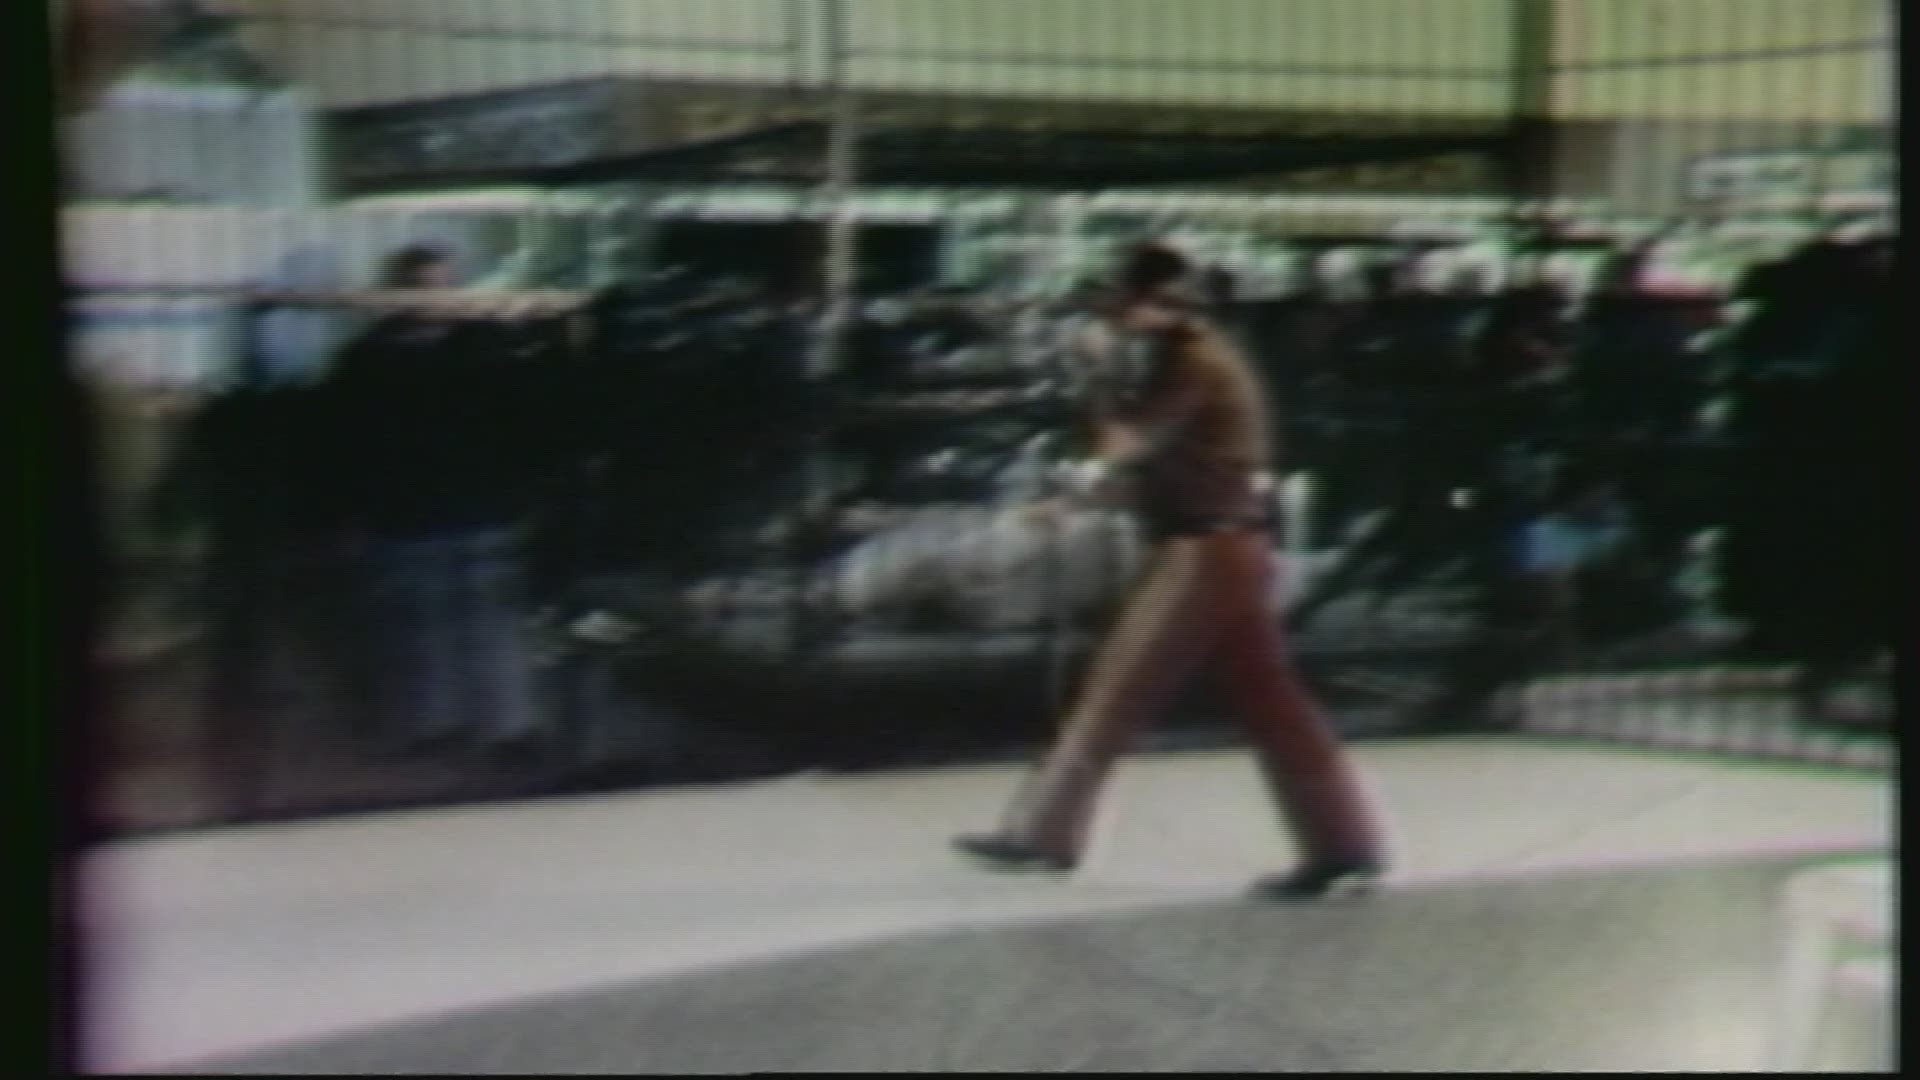 70 moments in WKYC history: Del Donahoo attacked by a lion in Elyria